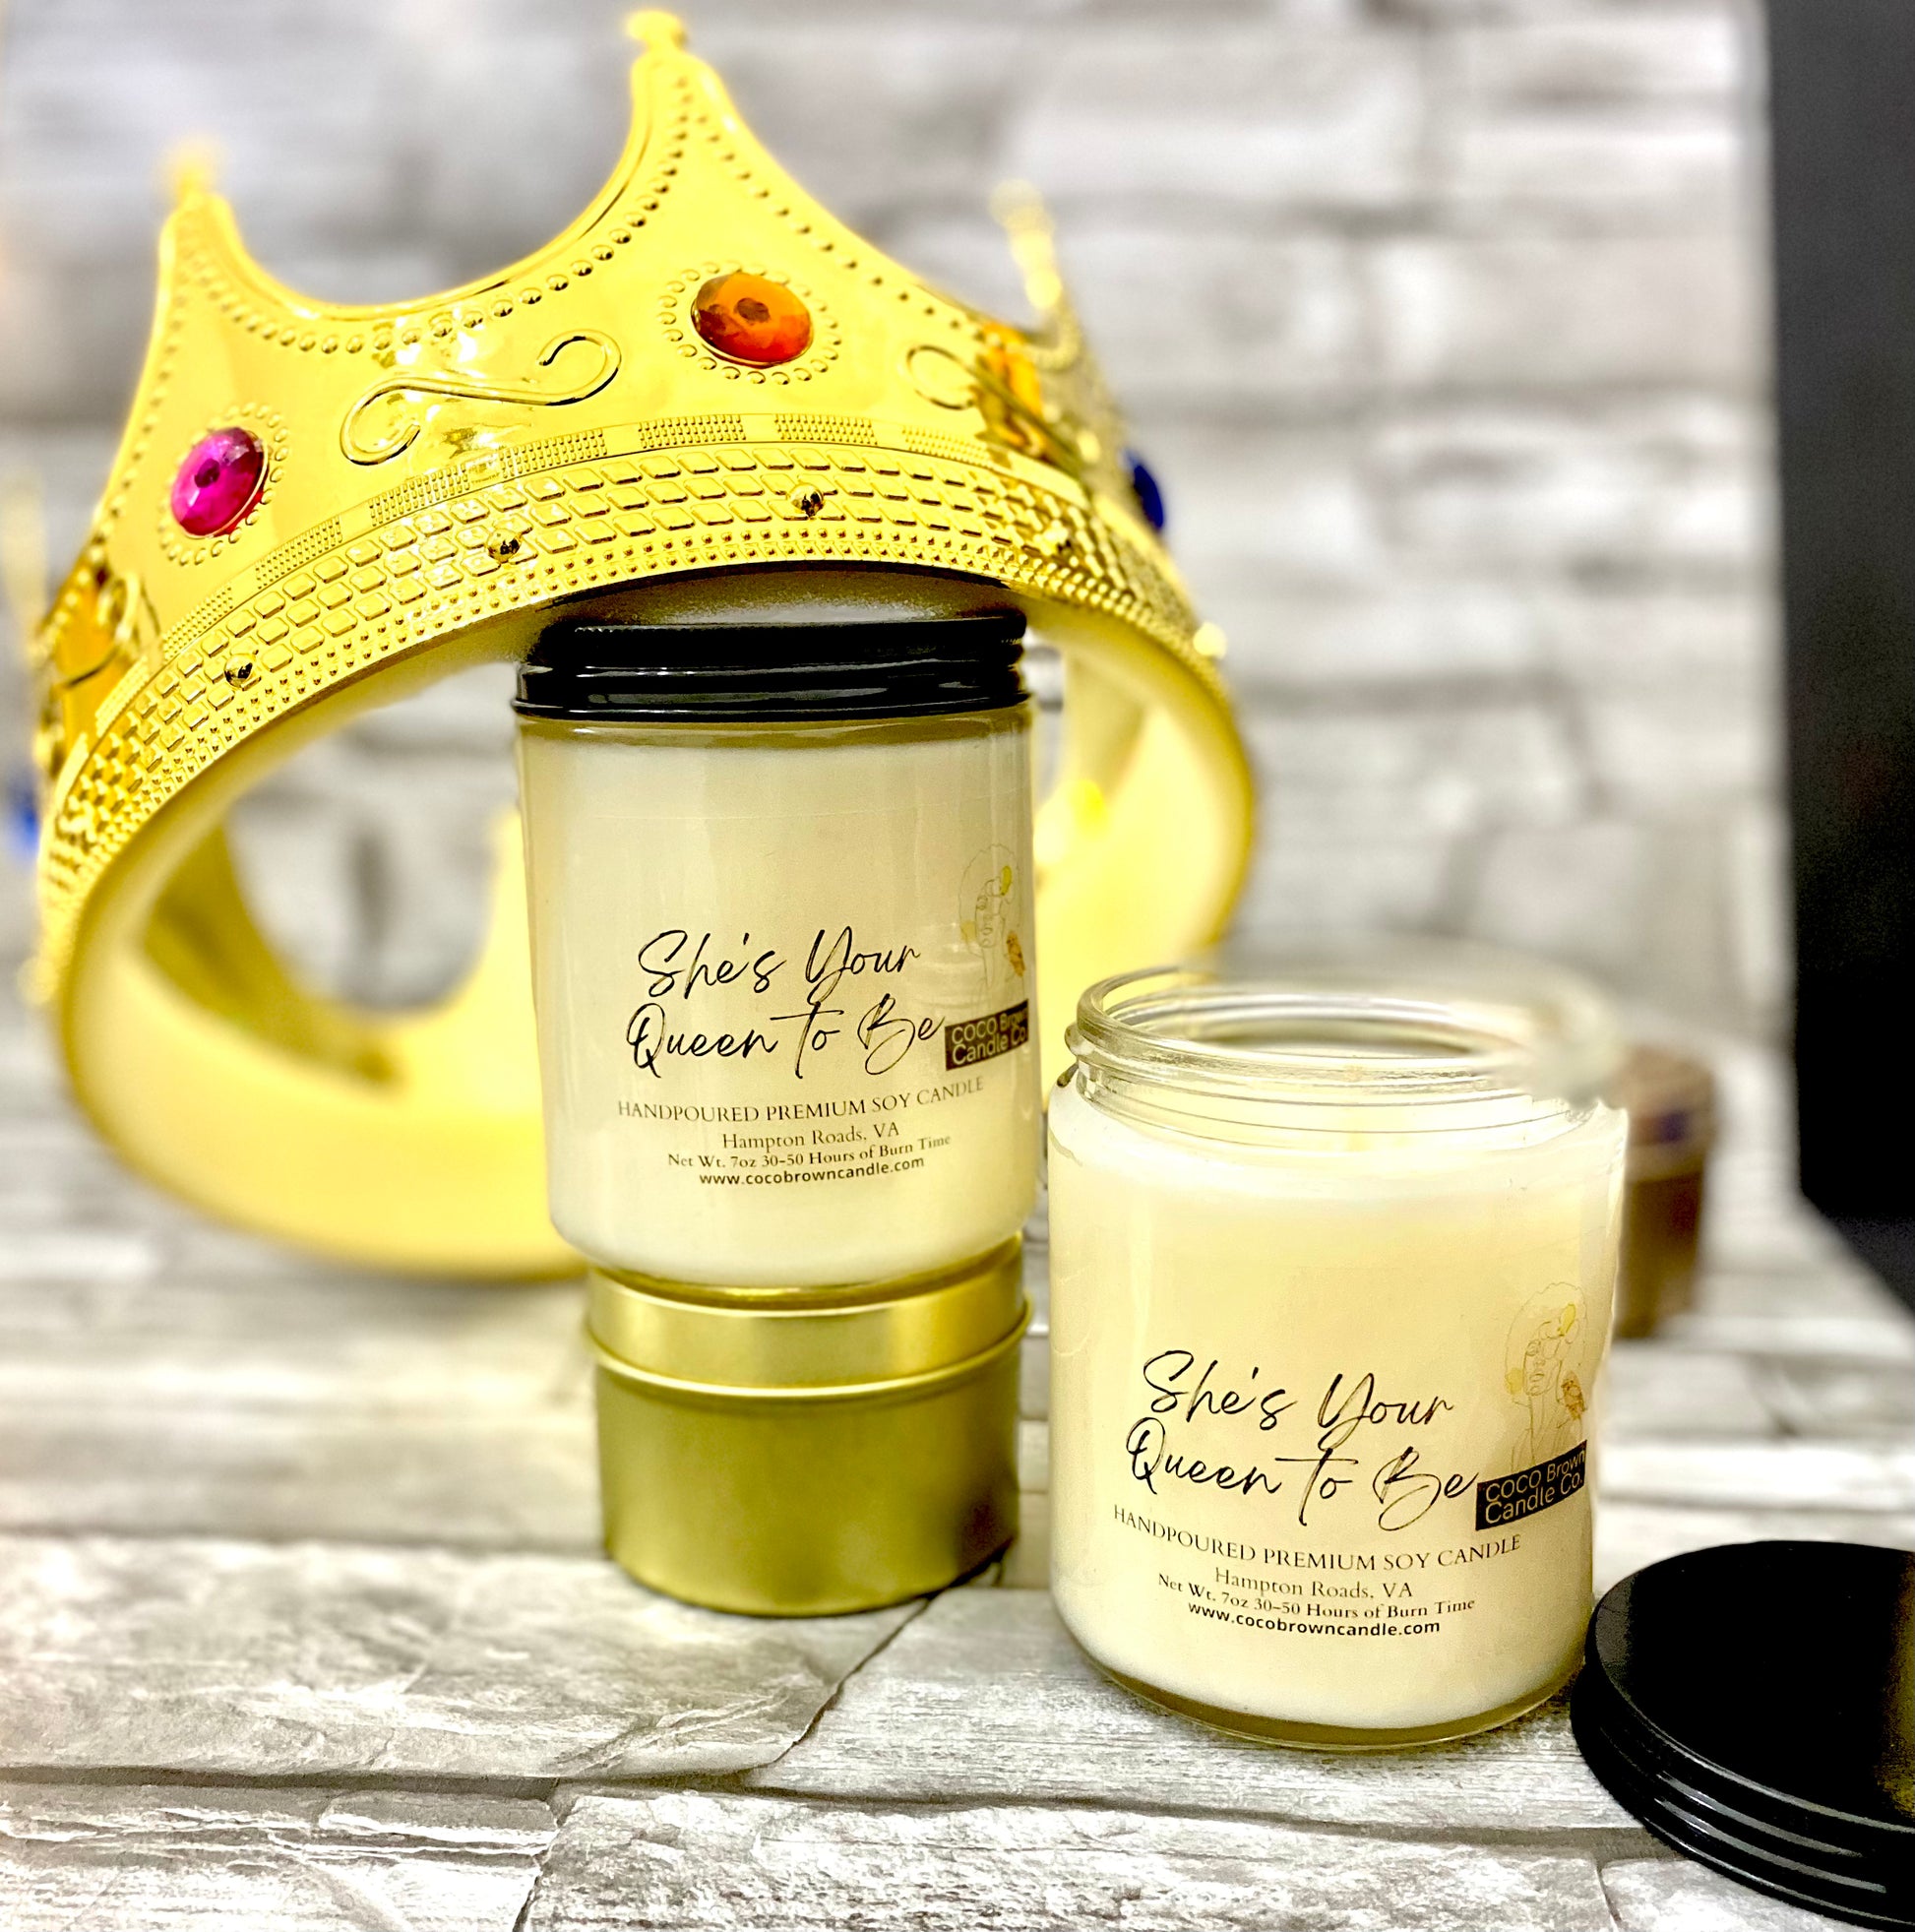 Queen Bee Candle Company